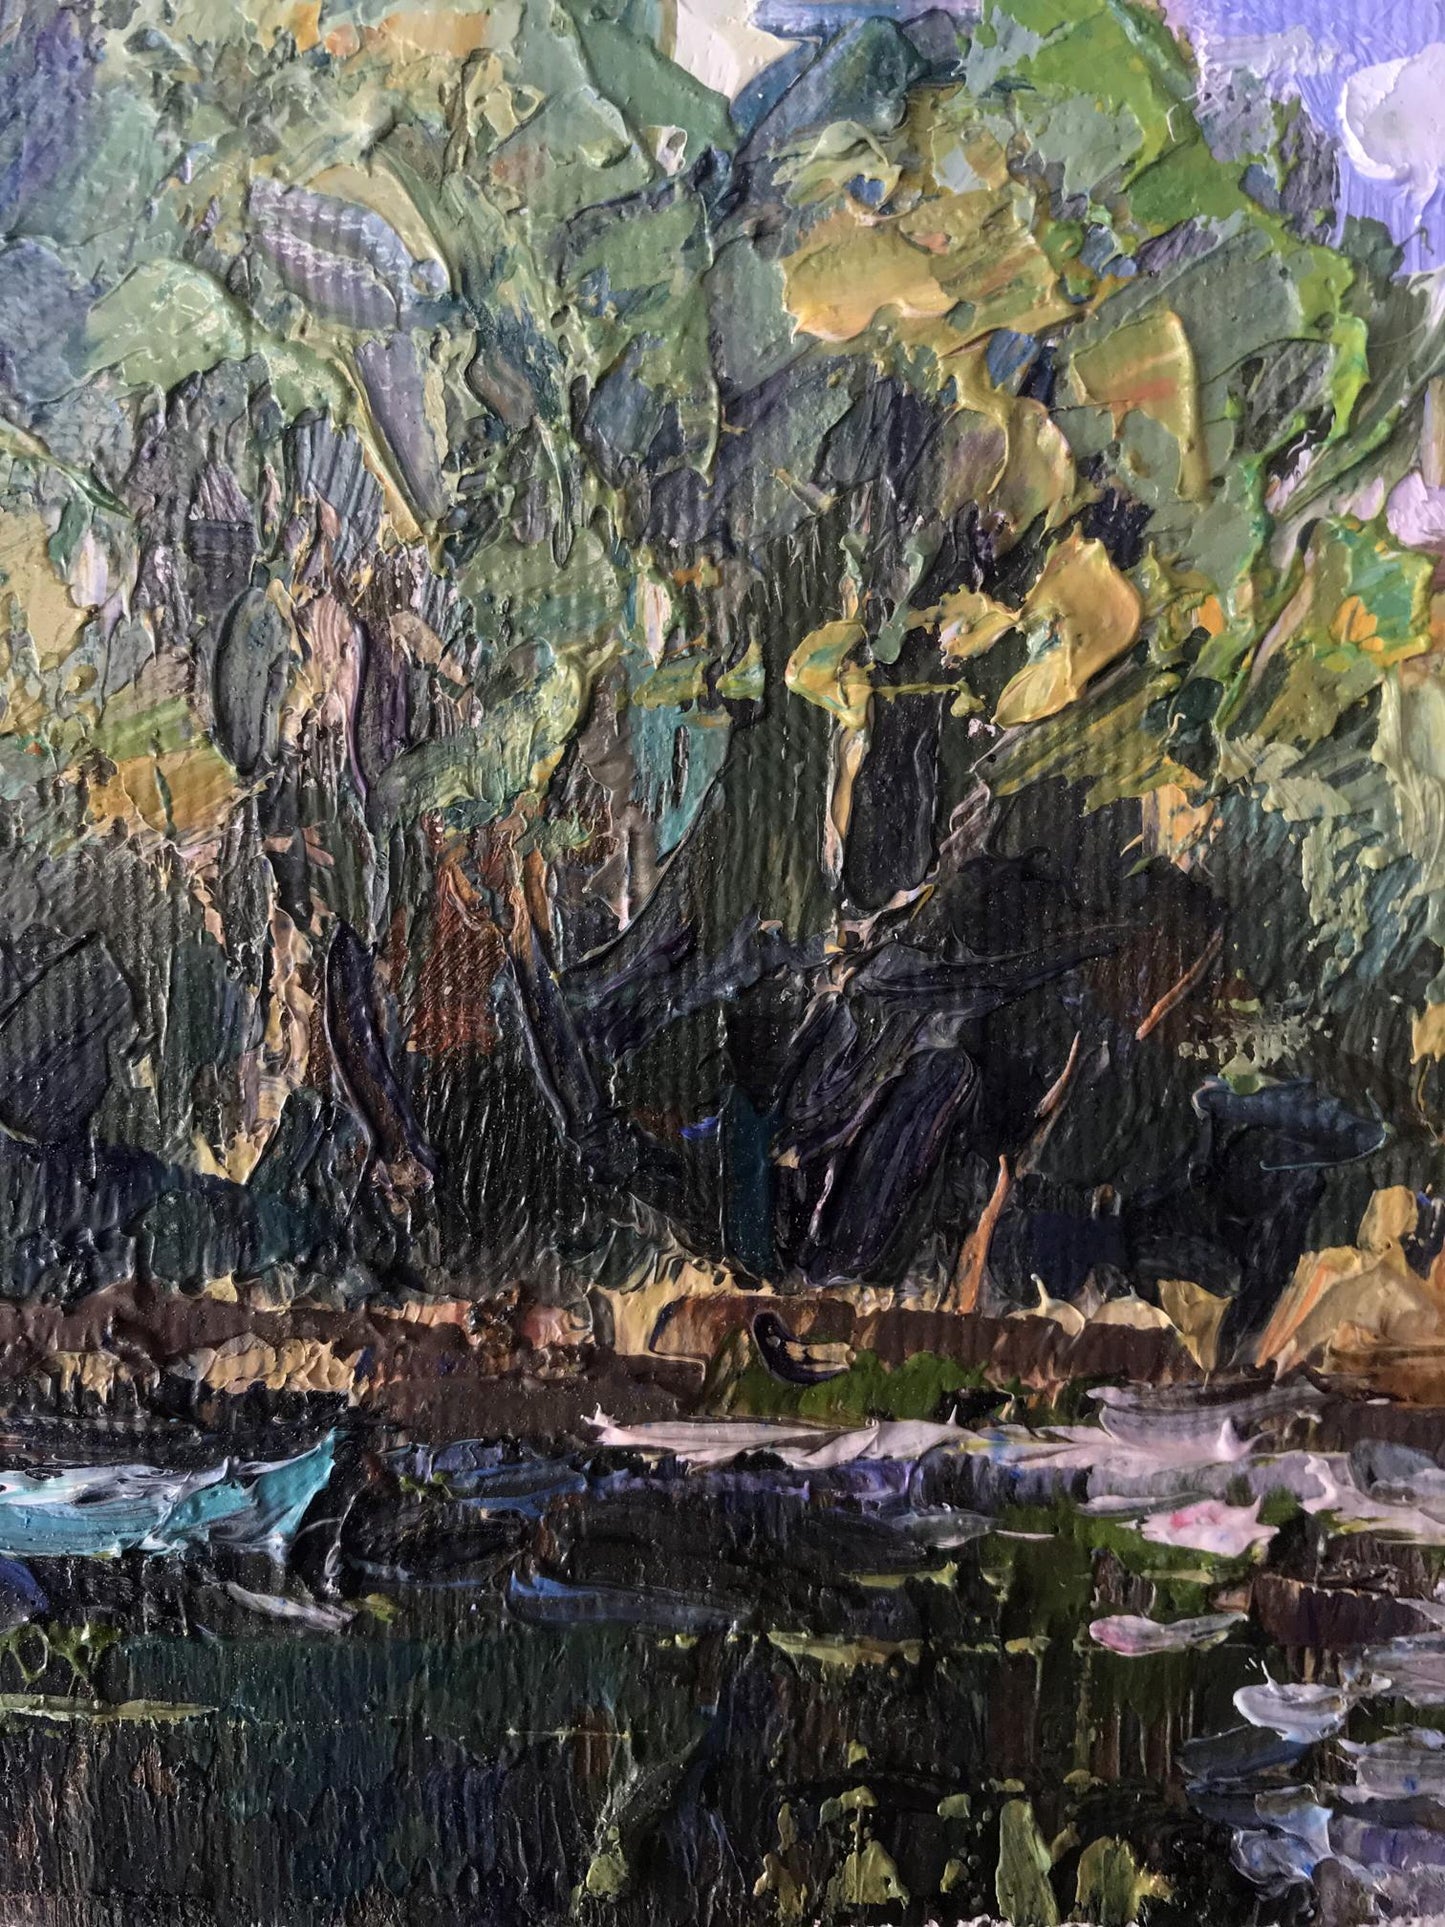 Oksana Ivanyuk captures the essence of seclusion in her oil painting of a forest lake